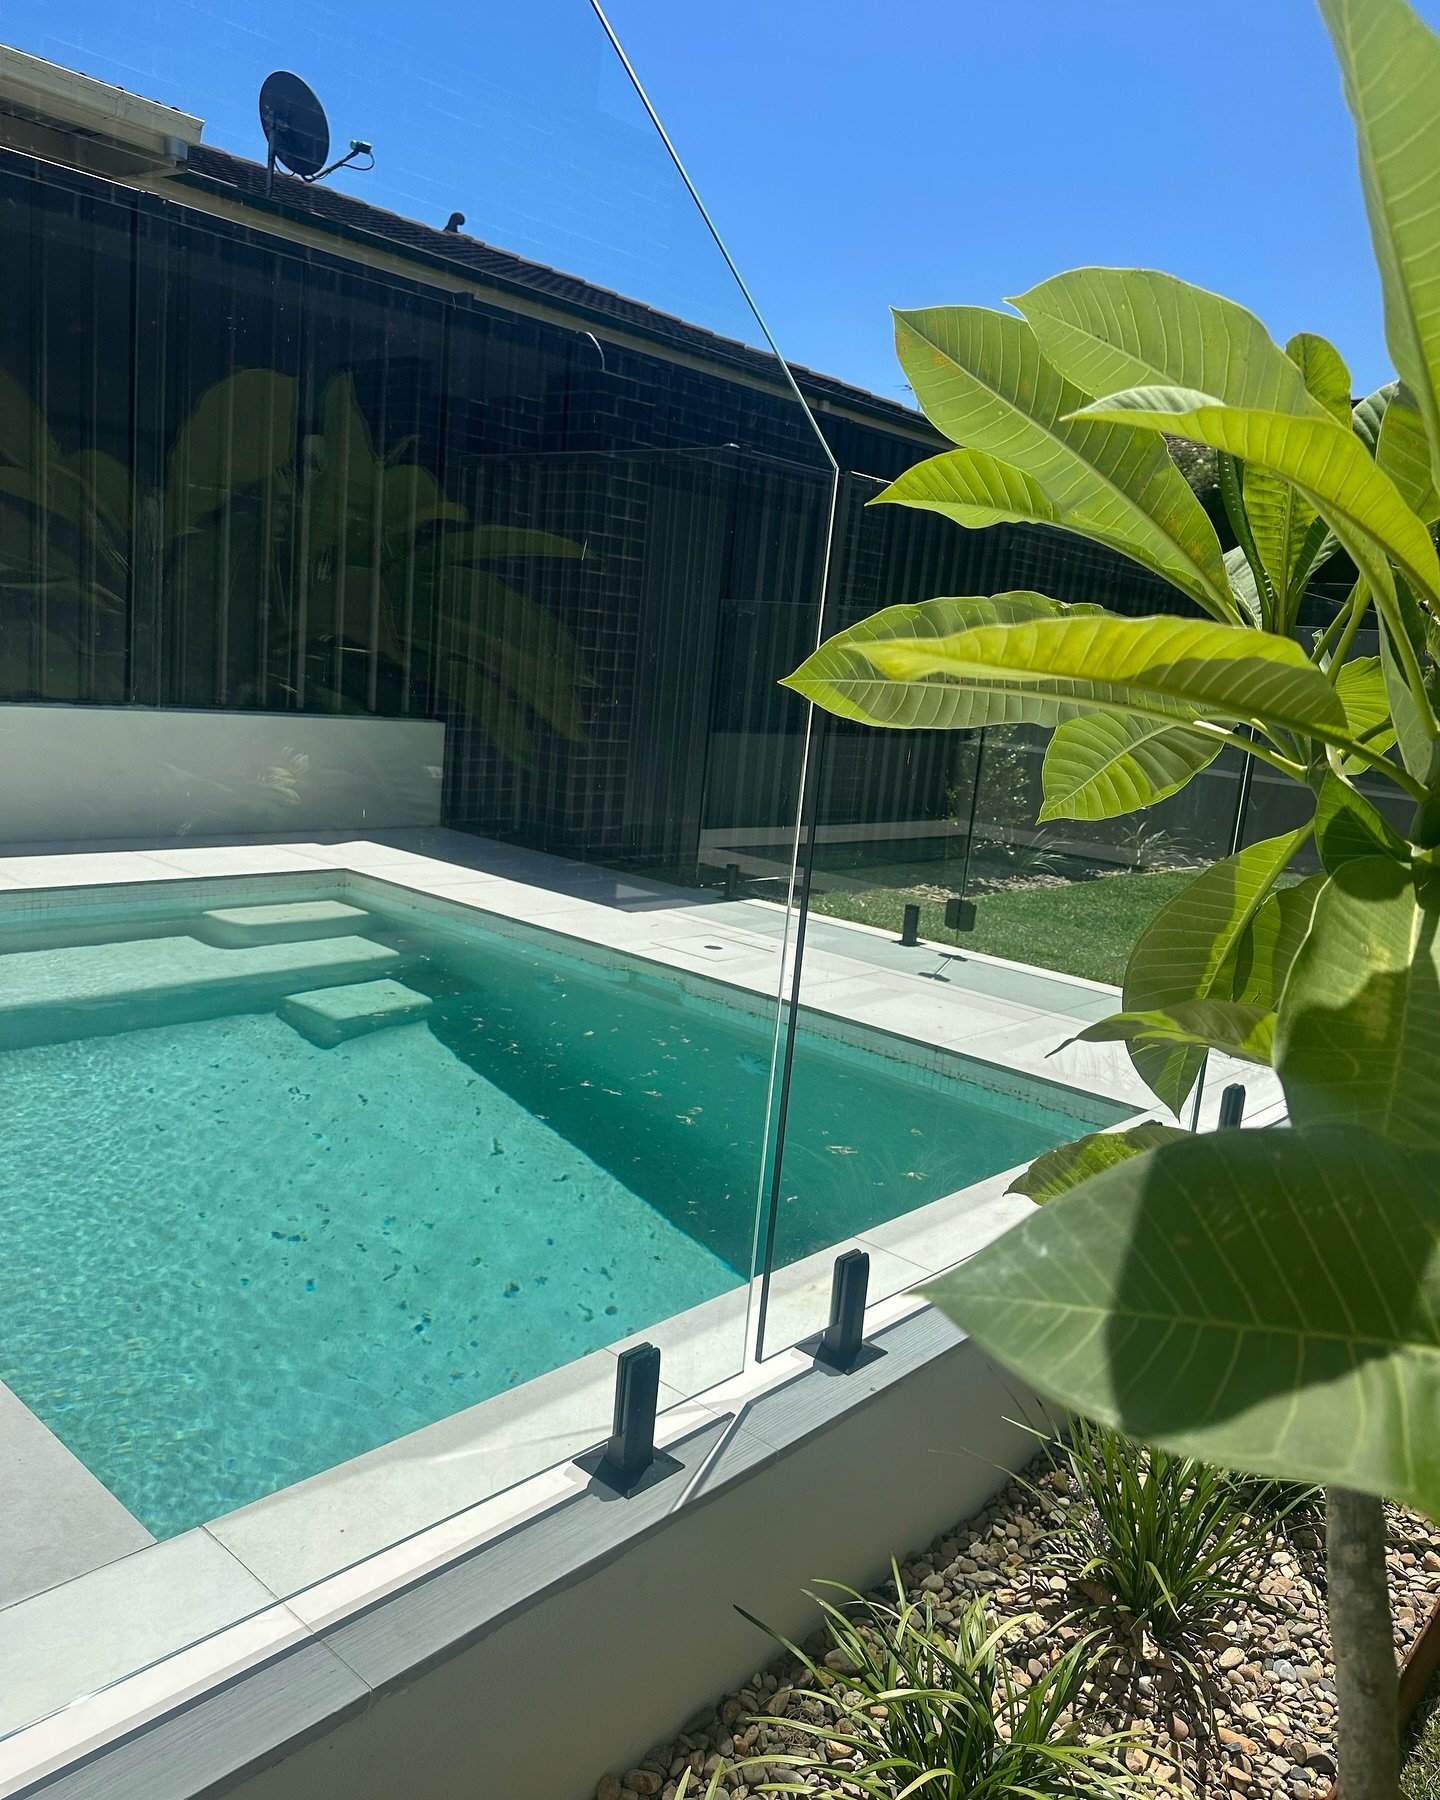 Duplex Pools &amp; Landscaping | Caringbah South 
.
.
.
.
.
.
.
.
.
.
#pool #landscaping #swimmingpool #duplex #forlease #home #clients #building #builders #sutherlandshirepoolbuilder #traydpools #driveways #sutherlandshirebuilding #projects #summer 